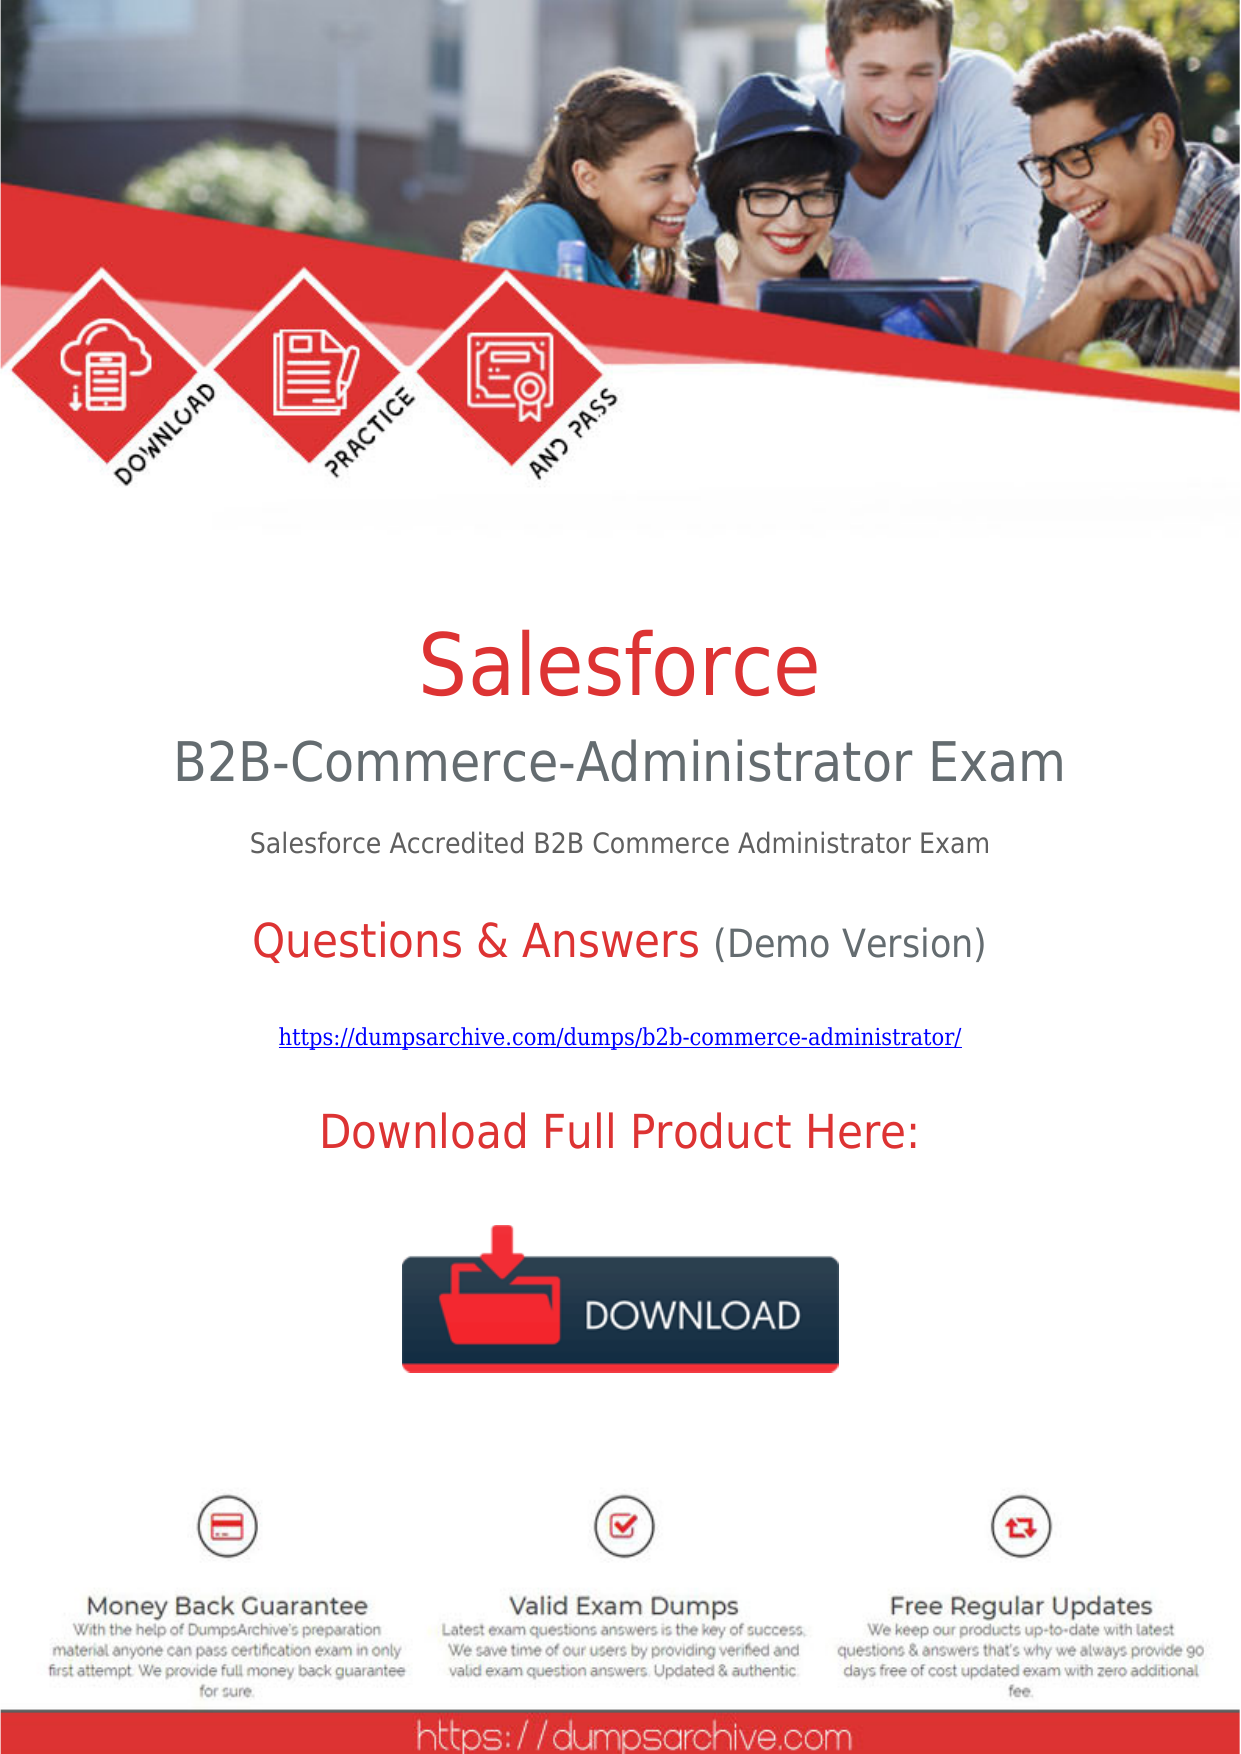 B2B-Commerce-Administrator Reliable Test Answers